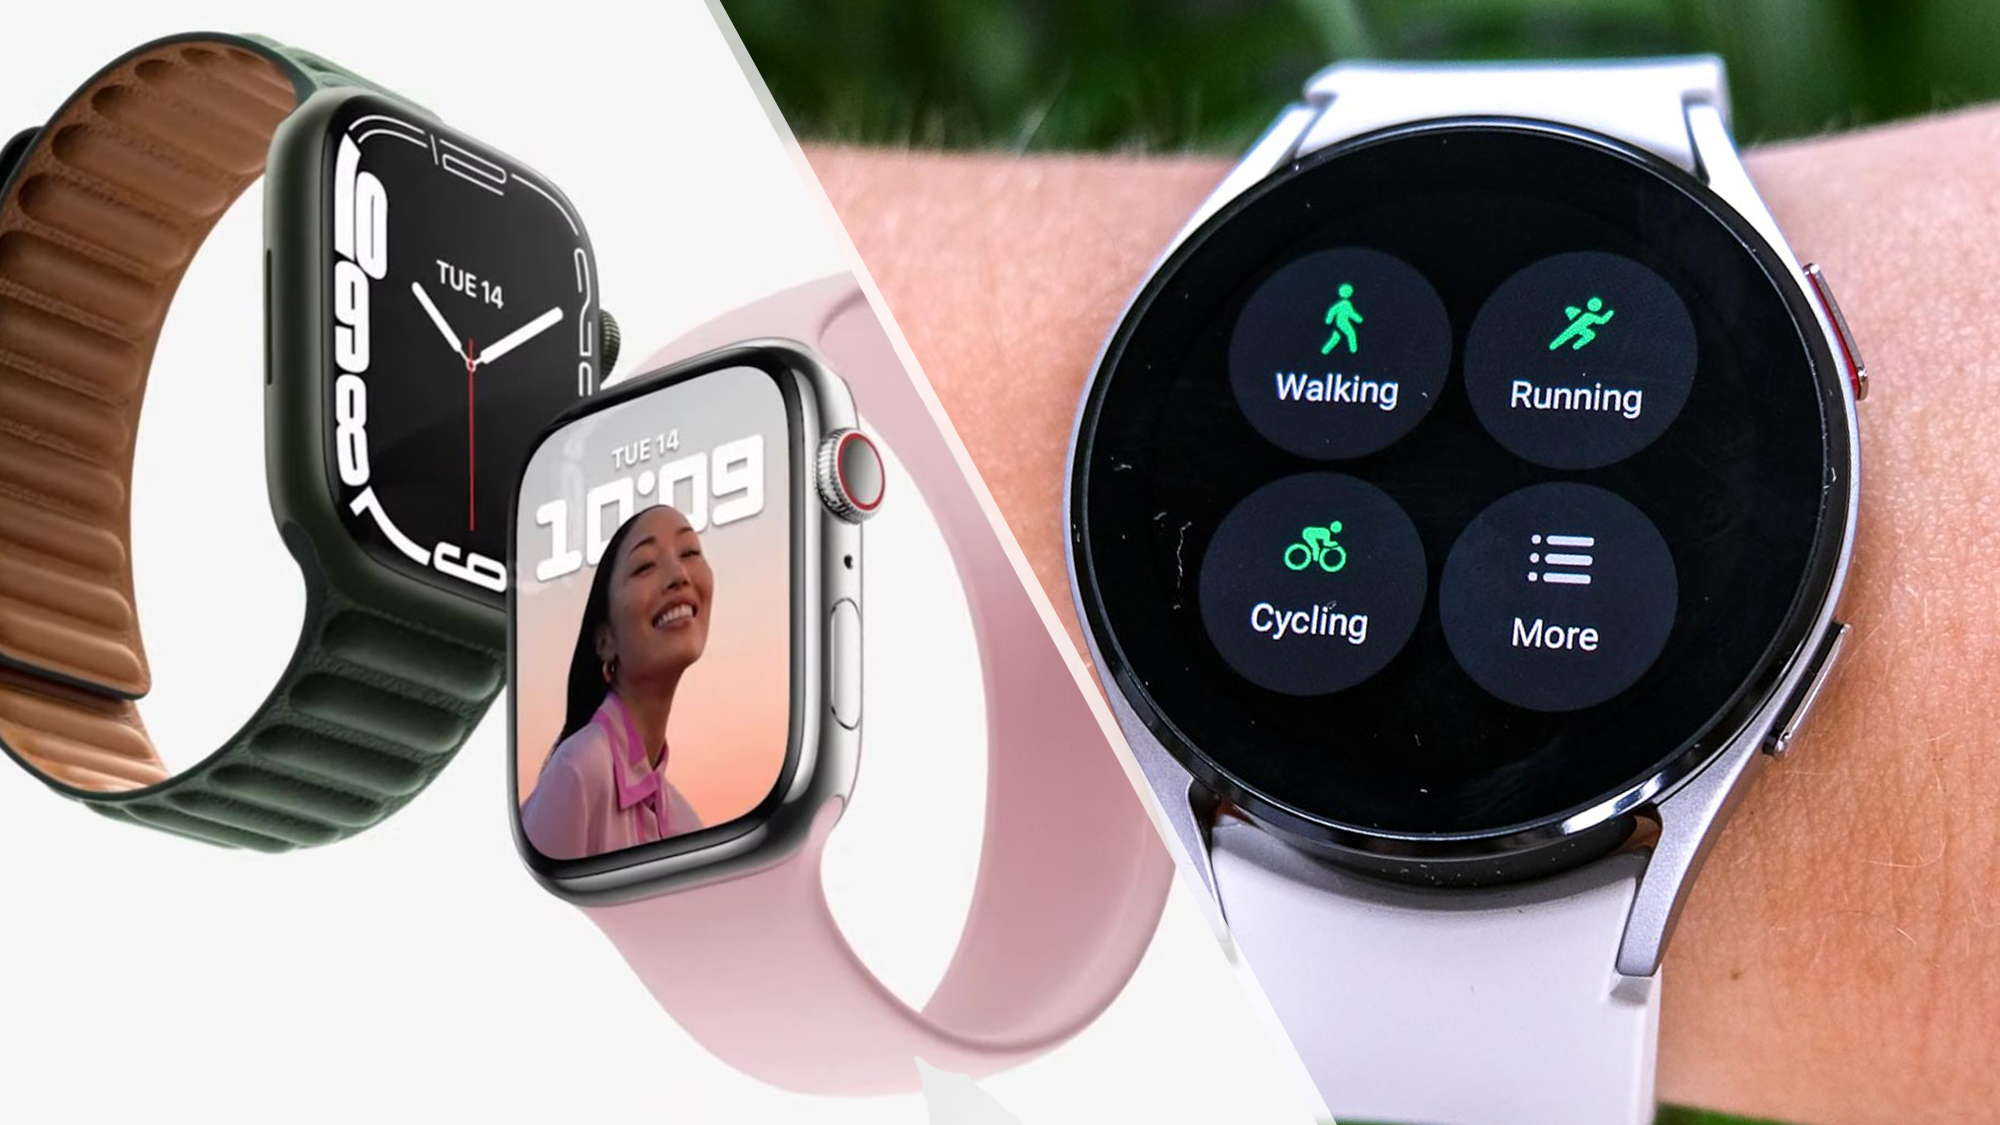 Smartwatch buying guide: Everything need to know | Tom's Guide